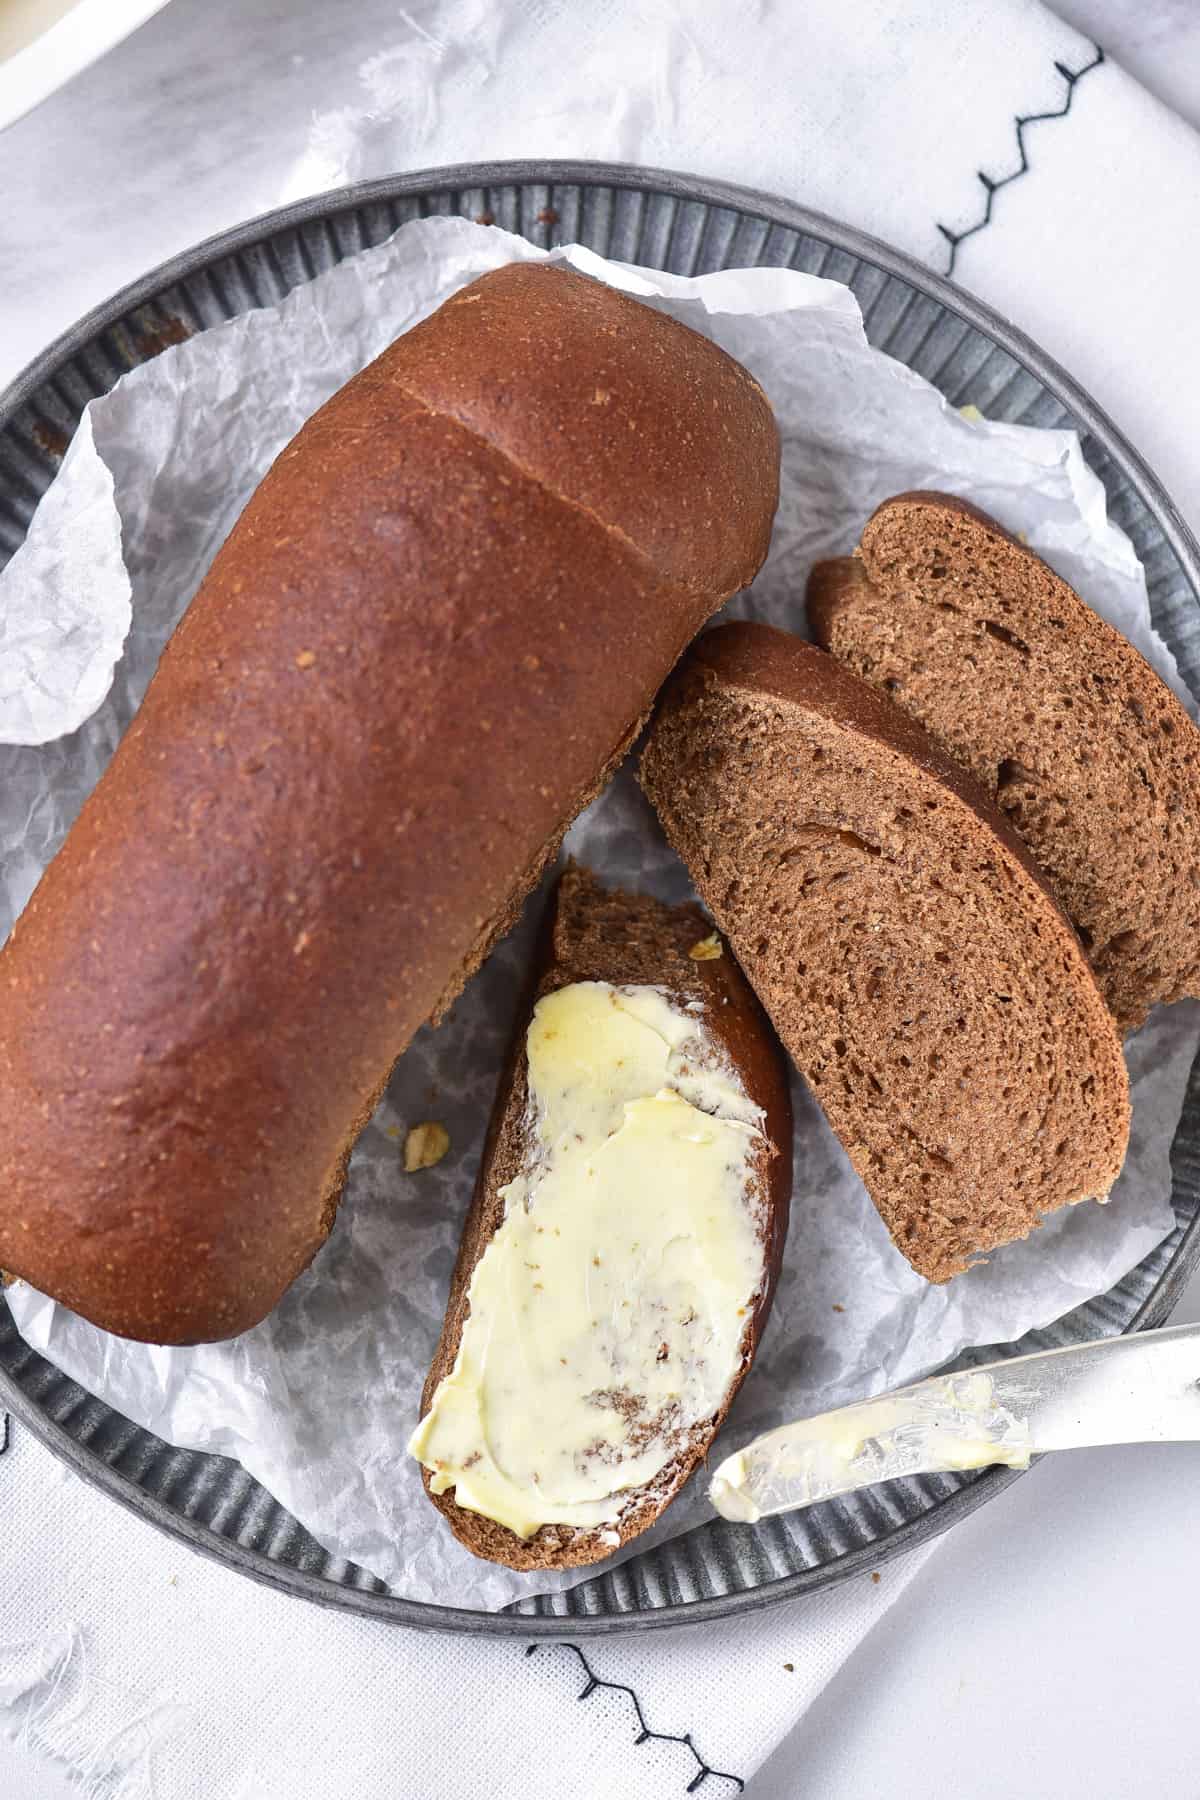 Sliced Outback Steakhouse bread on a plate, with one spread with butter.